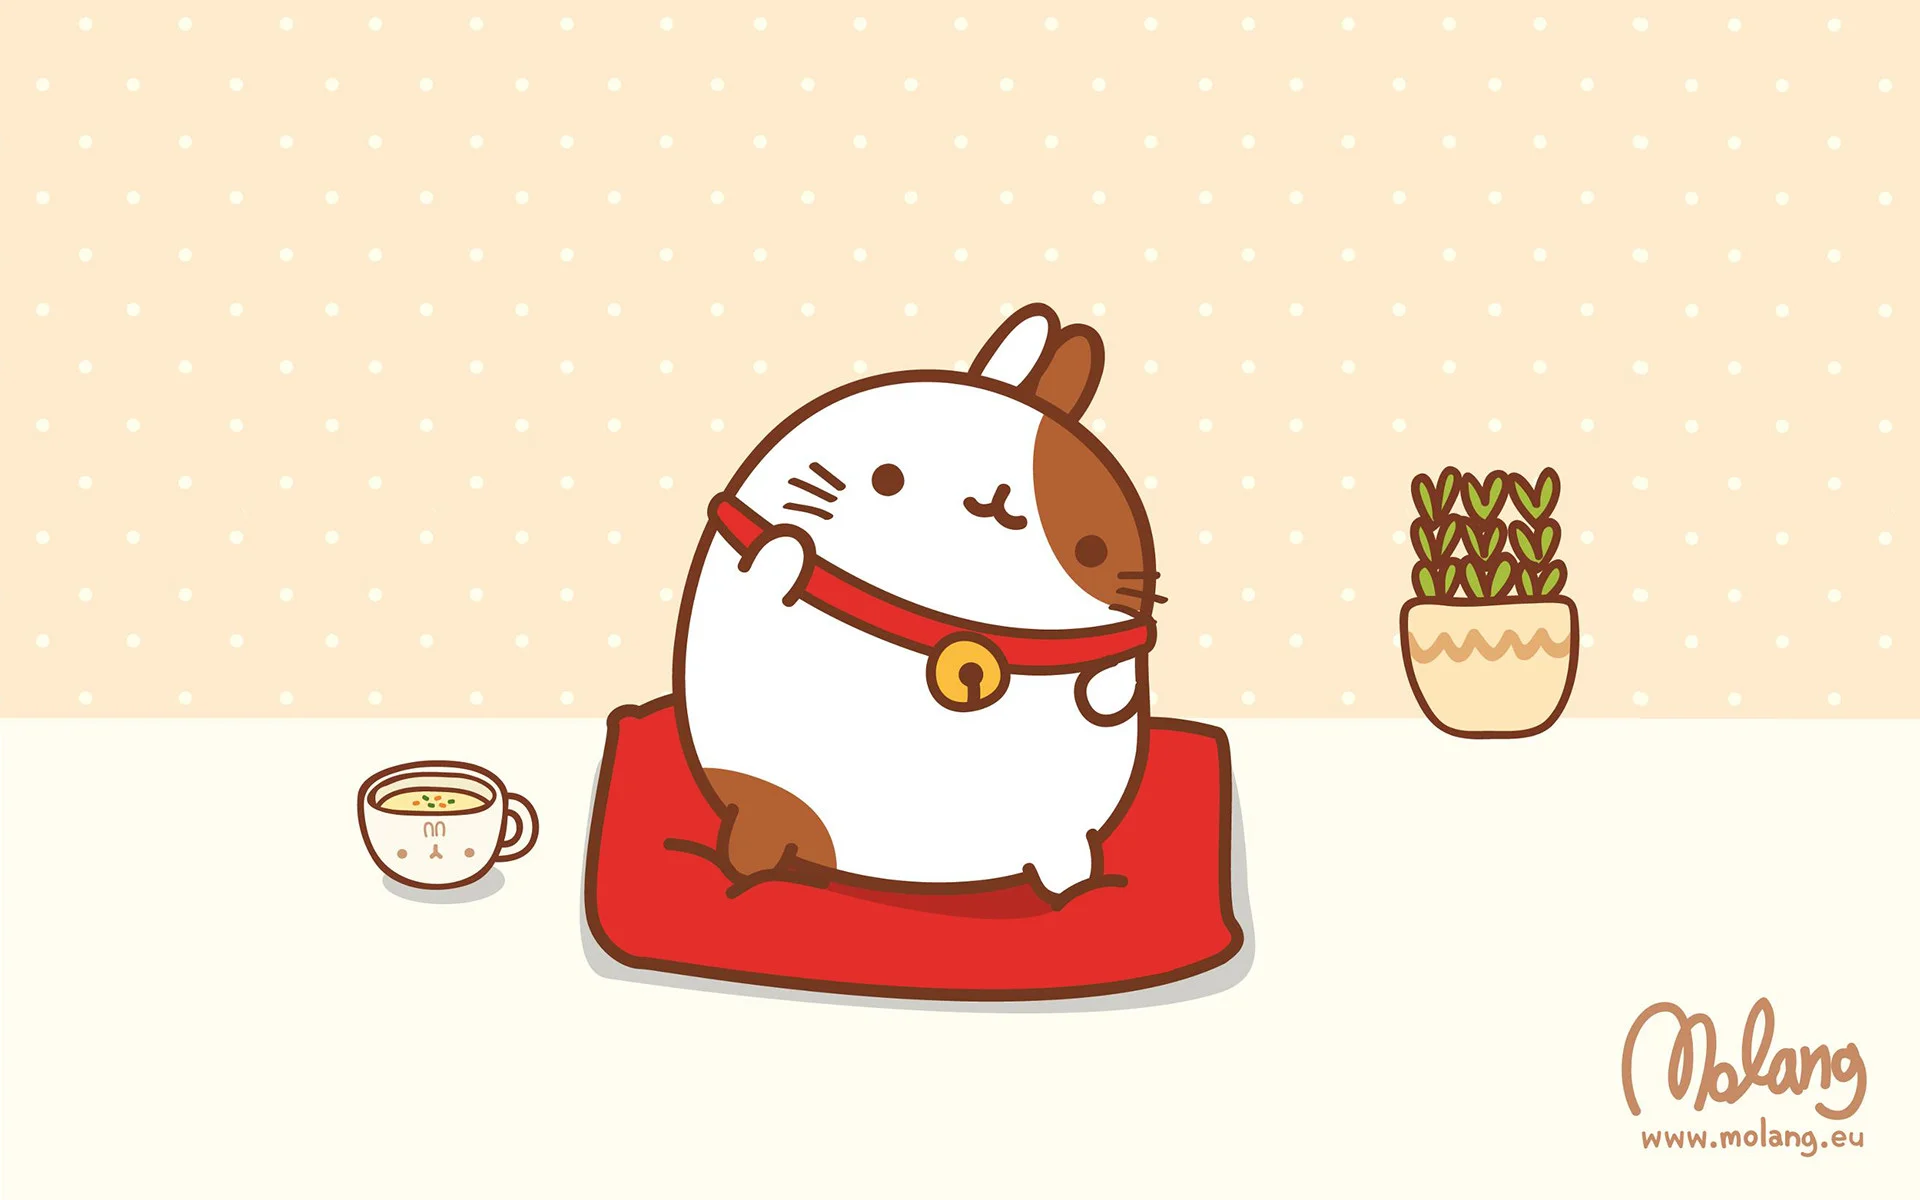 A brown and white hamster sitting on a red pillow next to a cup of coffee and a plant. - Molang